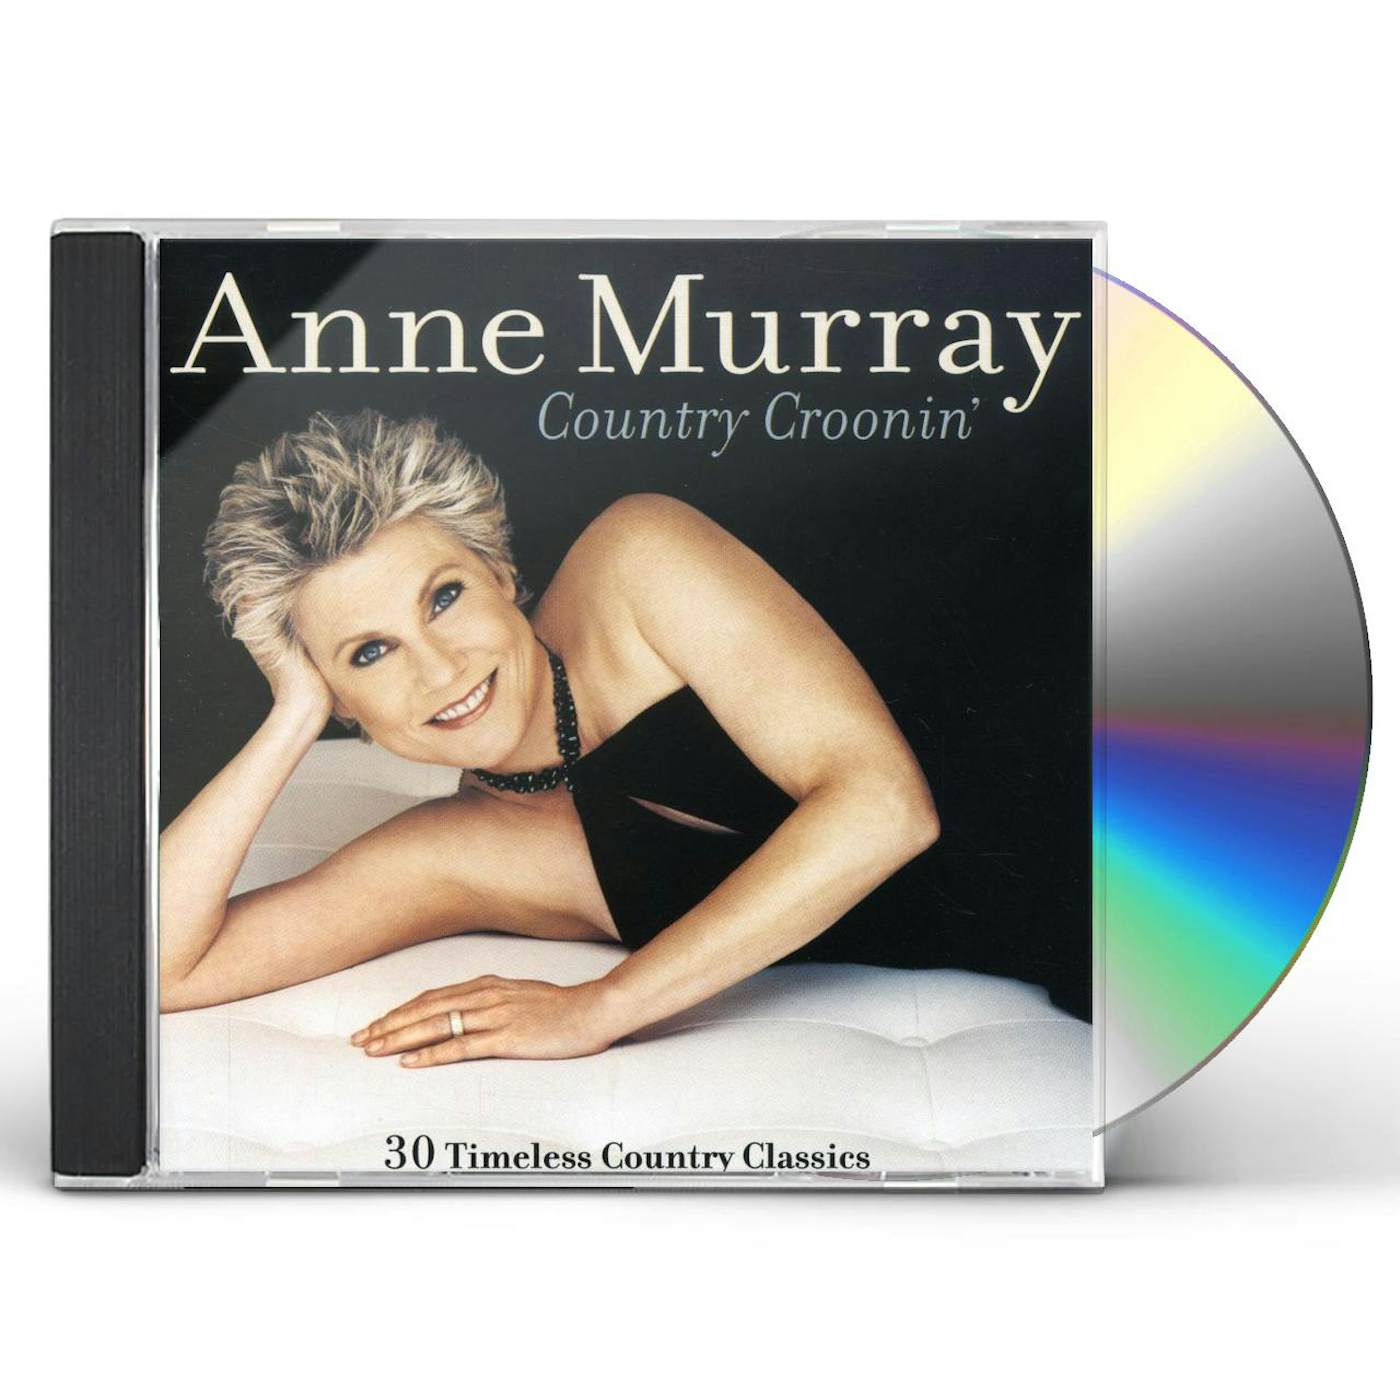 Anne Murray COUNTRY CROONIN CD